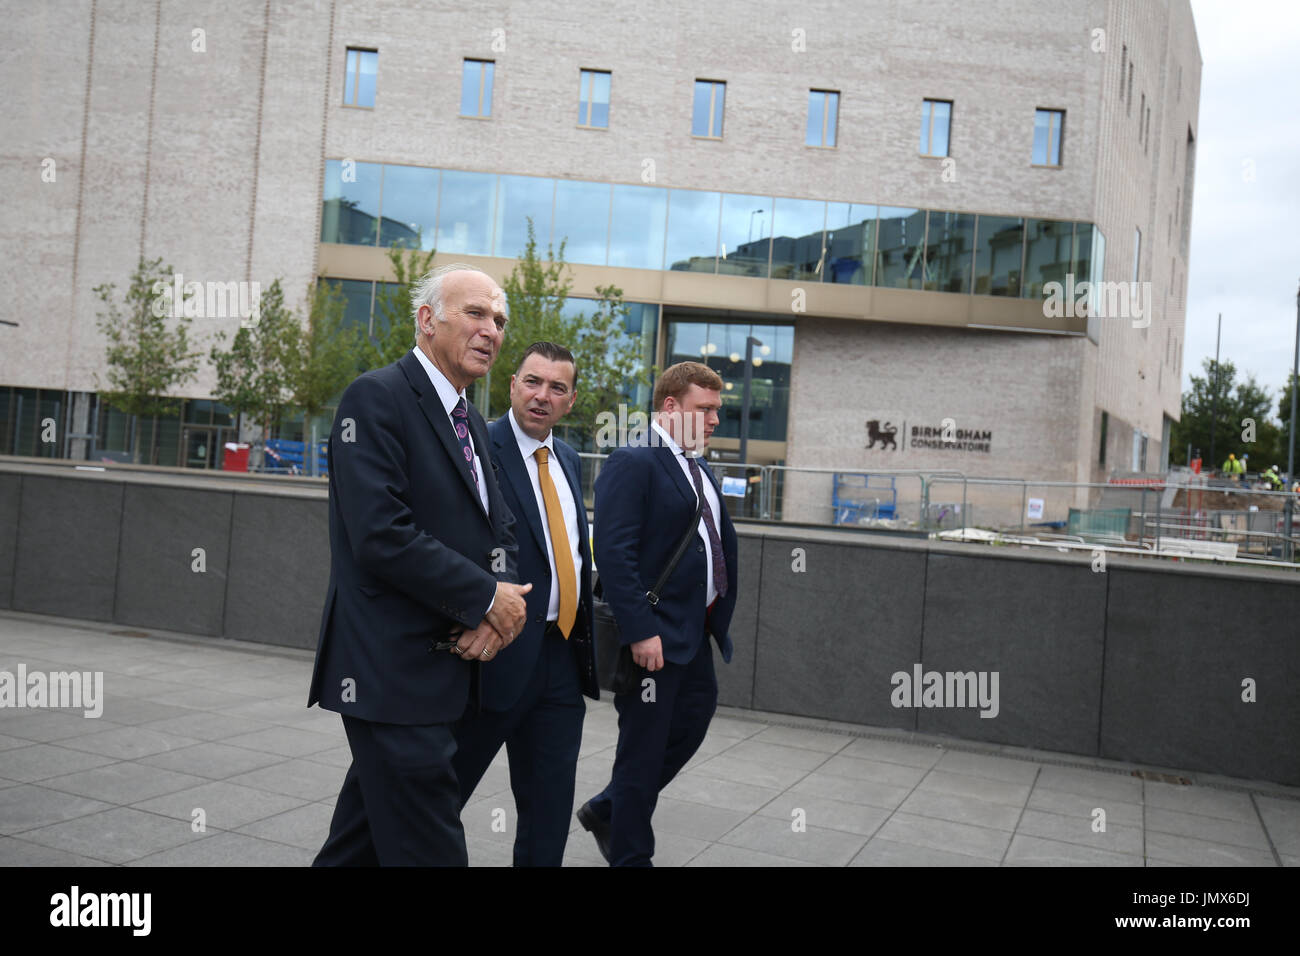 Liberal Democrats leader Sir Vince Cable (left) with Julian Beer, vice chancellor of Birmingham City University (centre) during a tour of the university after speaking at the university's Centre for Brexit Studies. Stock Photo